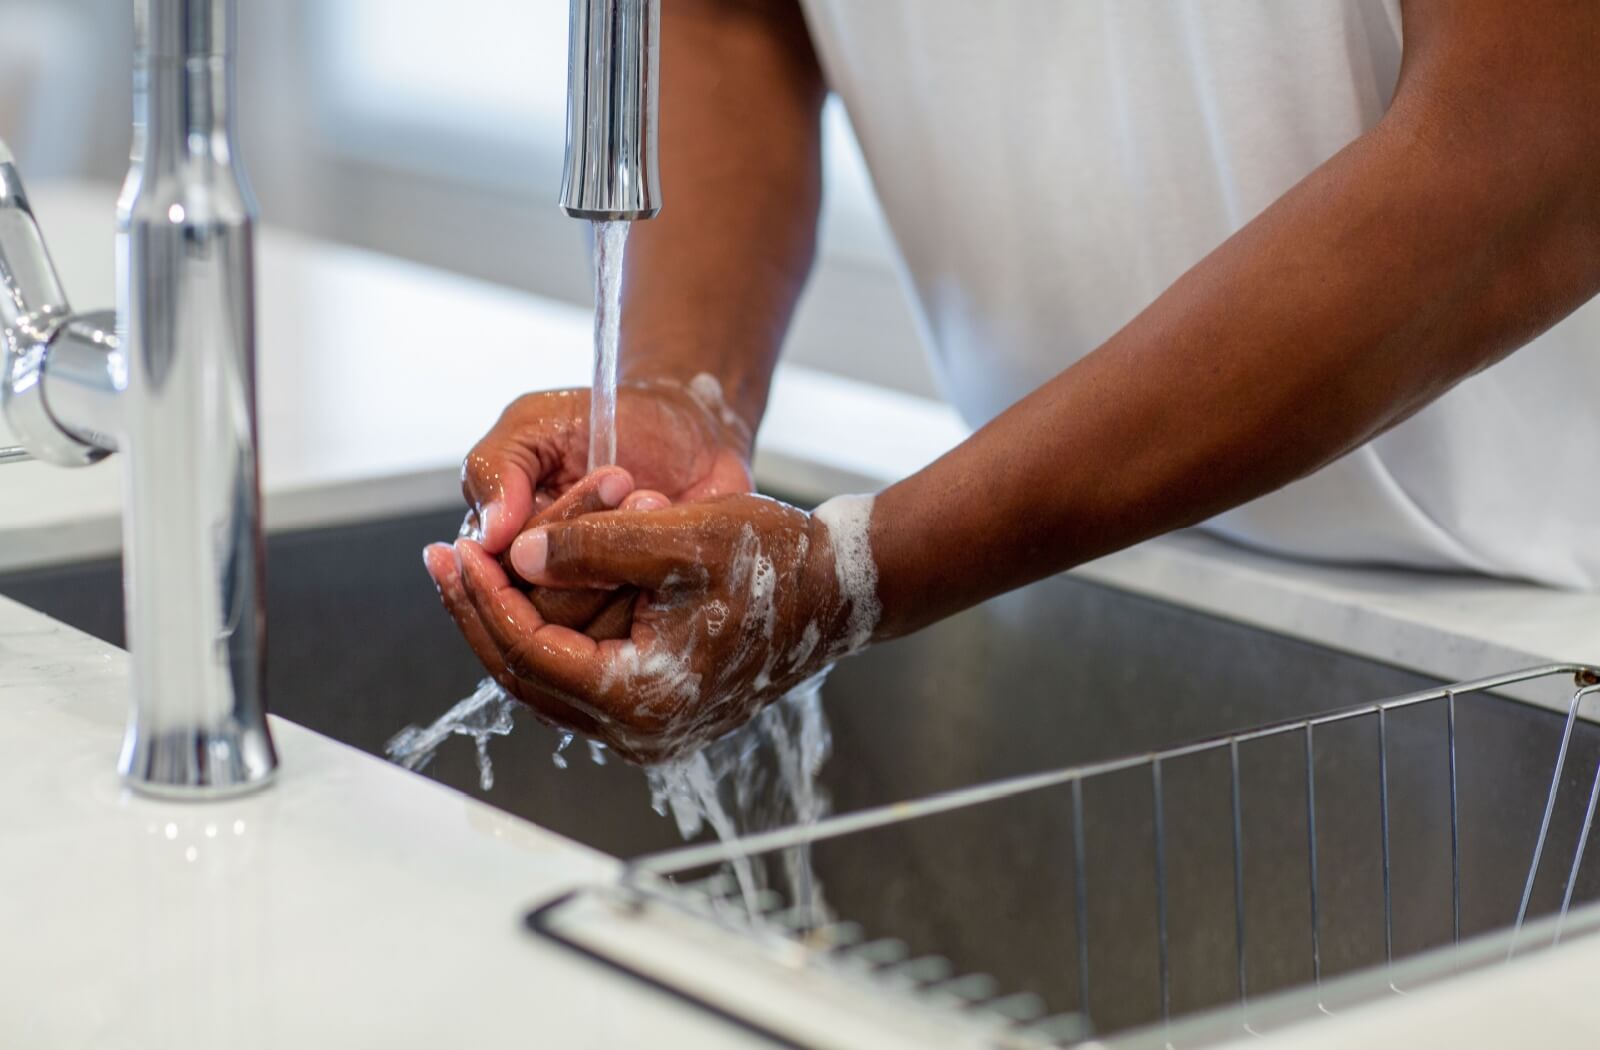 A close-up of a person washing their hands at a kitchen sink with soap and water.